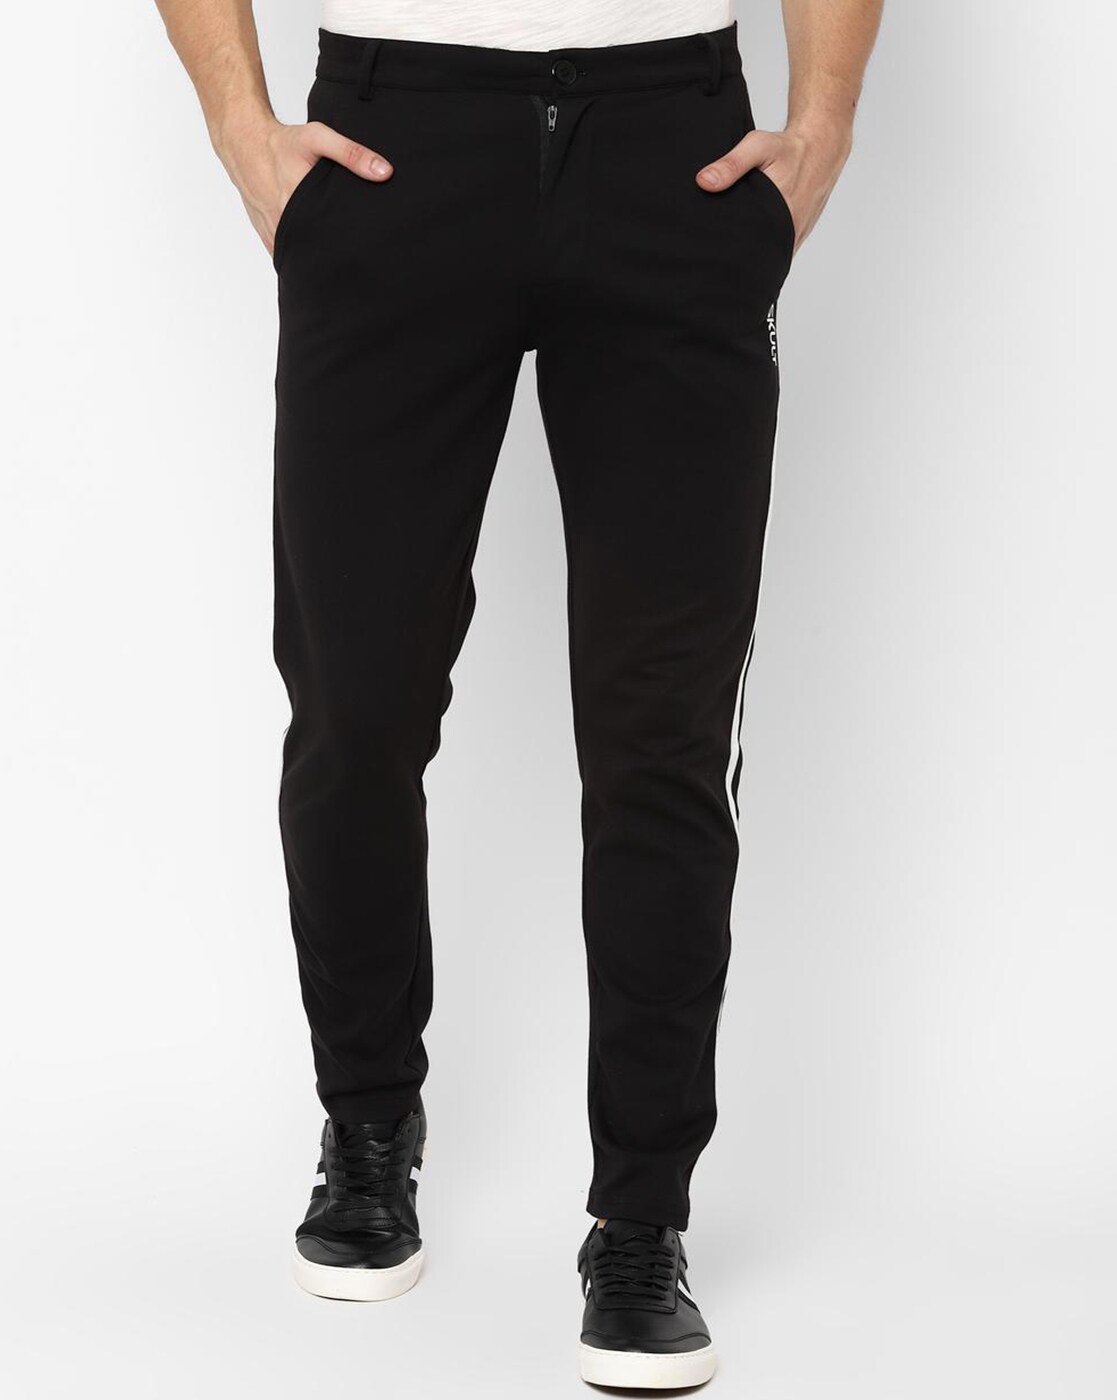 Buy Olive Green Track Pants for Men by SKULT by Shahid Kapoor Online |  Ajio.com